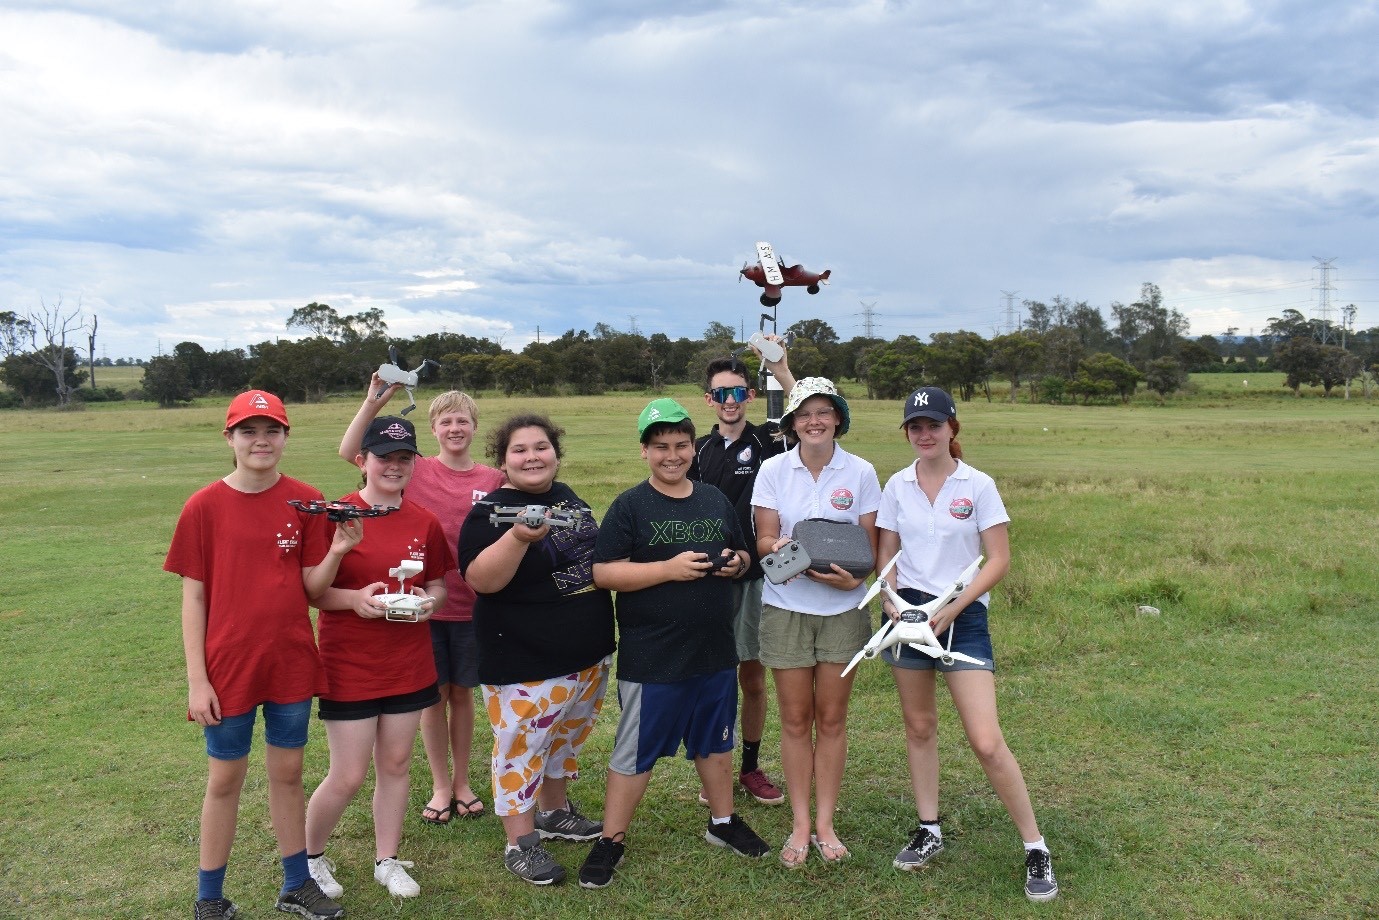 Our student ambassadors and gadget girlz at a Bring Your Own Drone Day – training for workshops and learning skills.